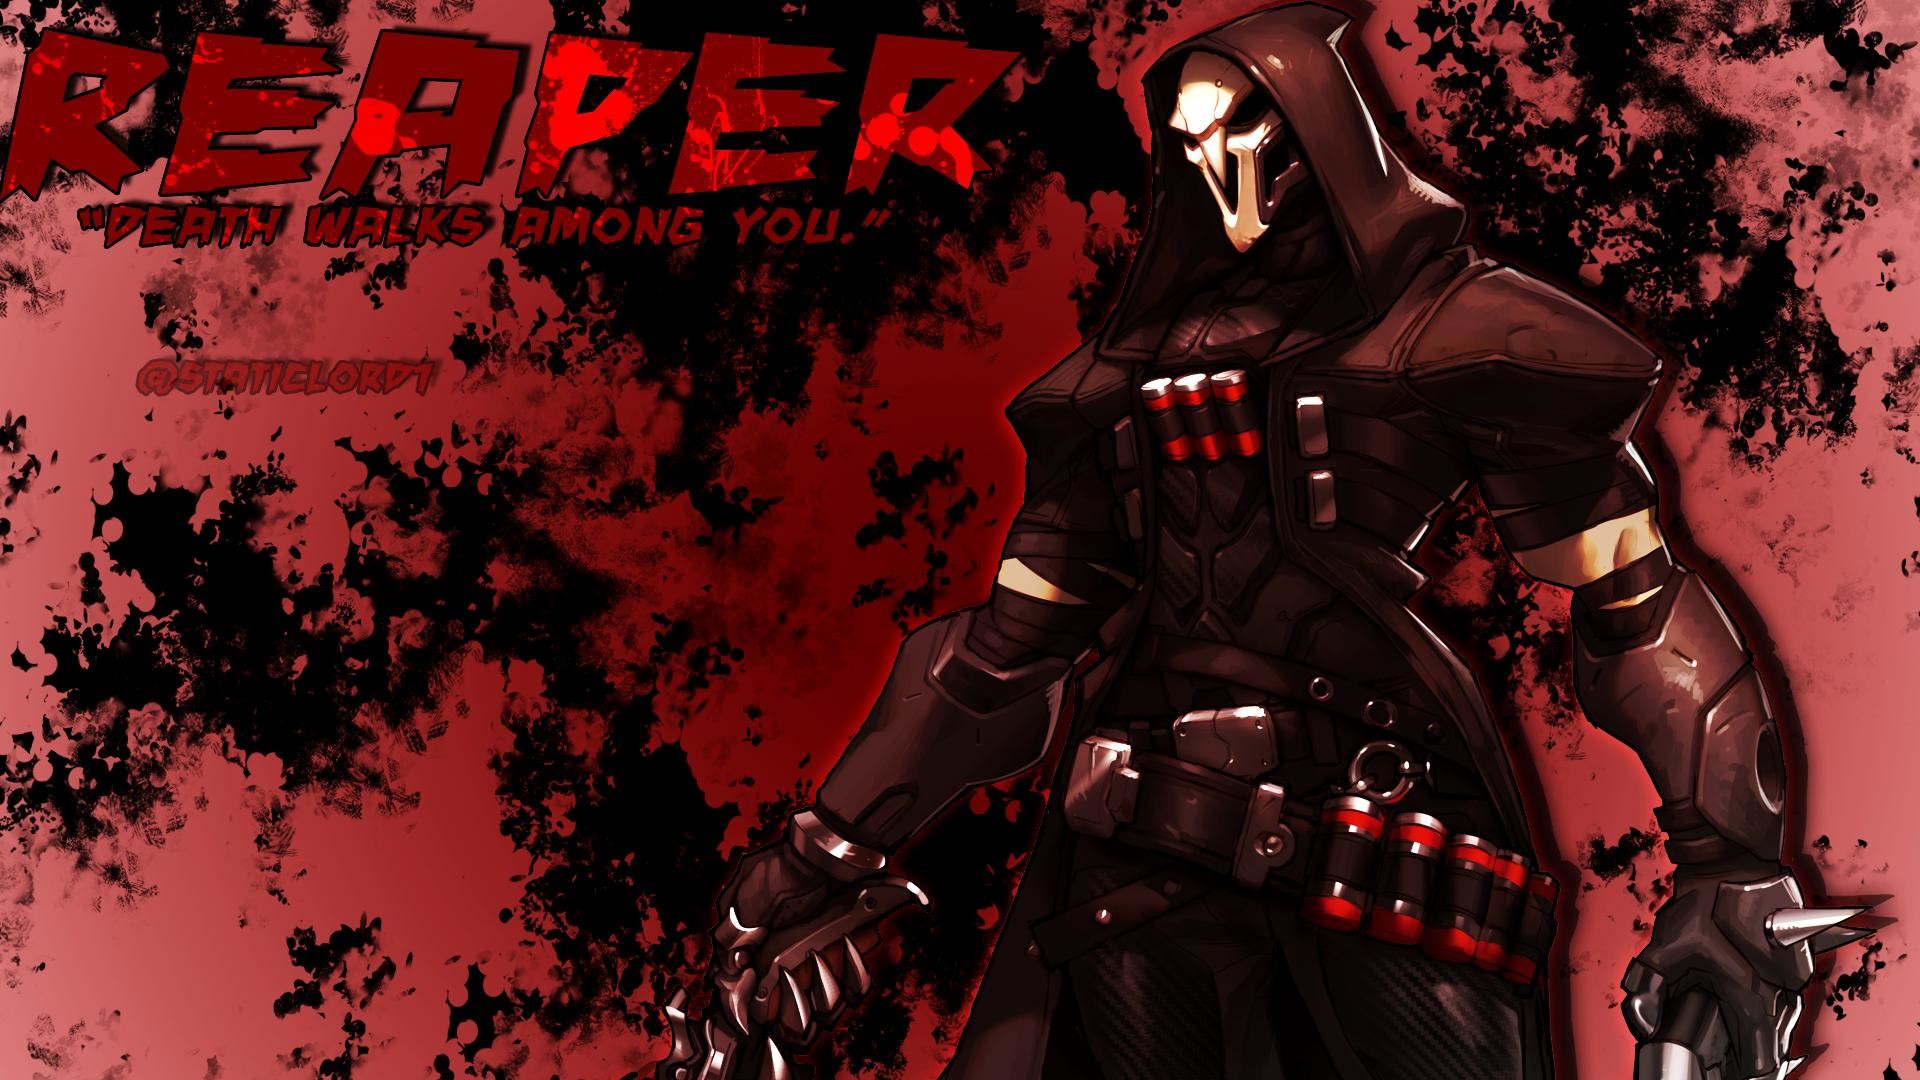 1920x1080 Reaper Overwatch Wallpaper. by staticlord1Jun 3 2016. Reaper Overwatch  Wallpaper Reaper Overwatch Wallpaper